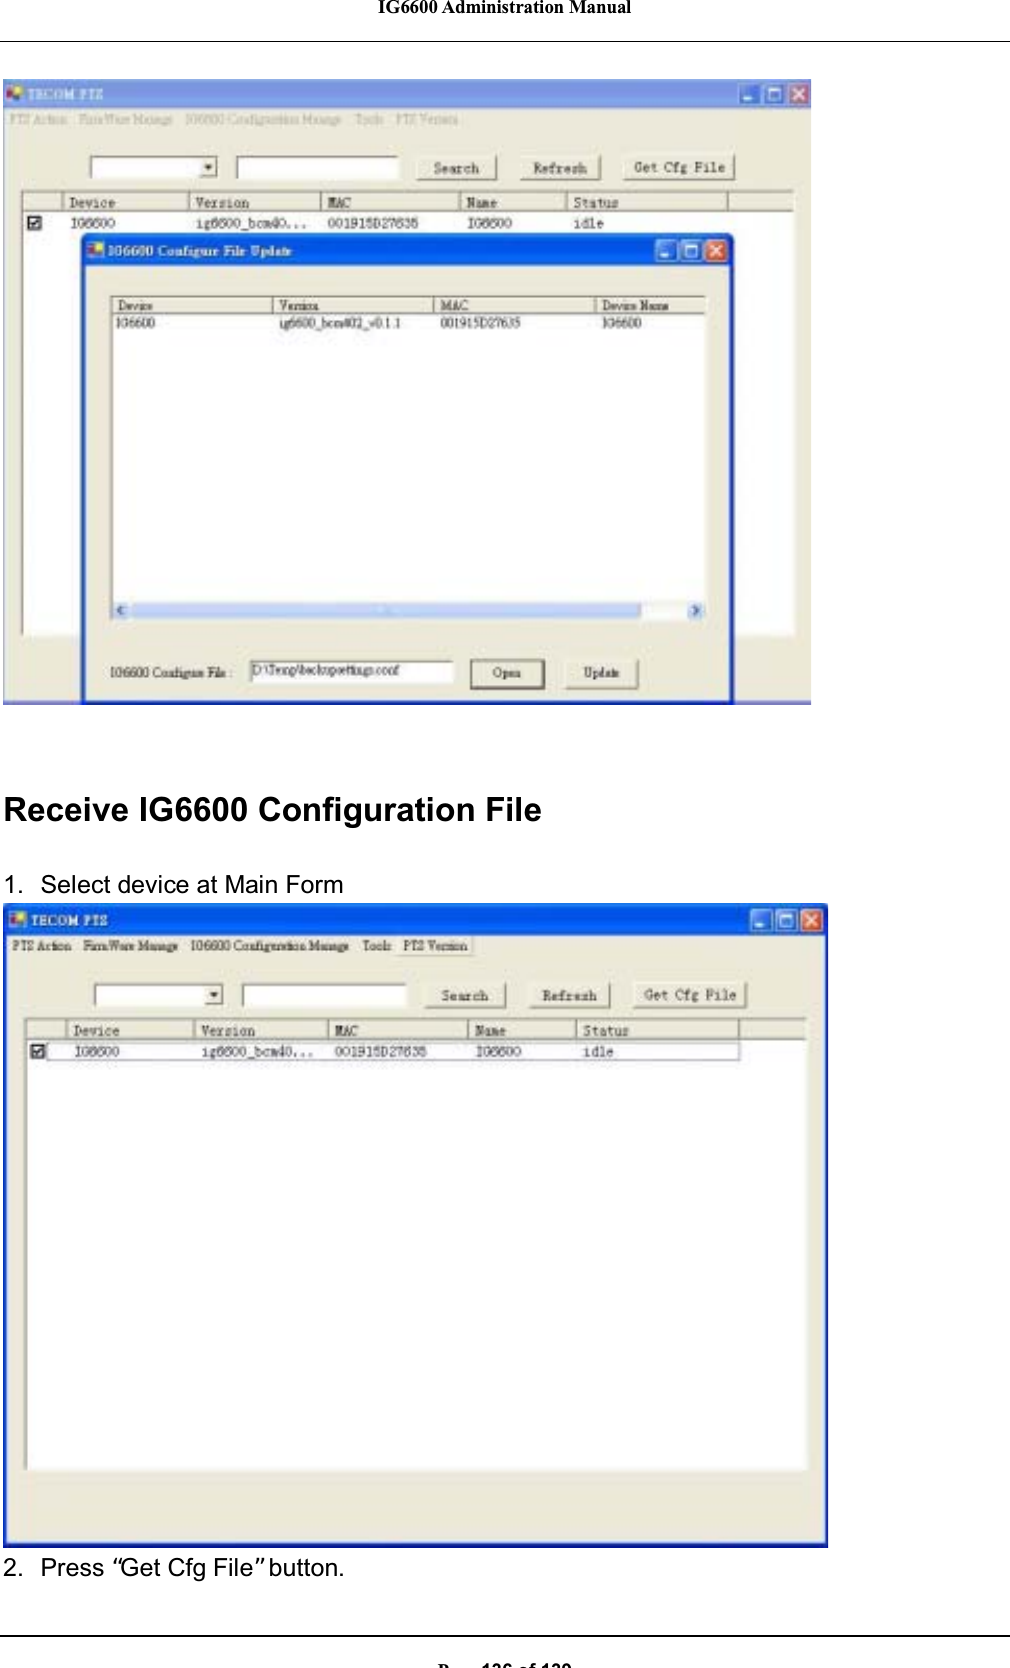 IG6600 Administration ManualP136of139Receive IG6600 Configuration File1. Select device at Main Form2. Press “Get Cfg File”button.